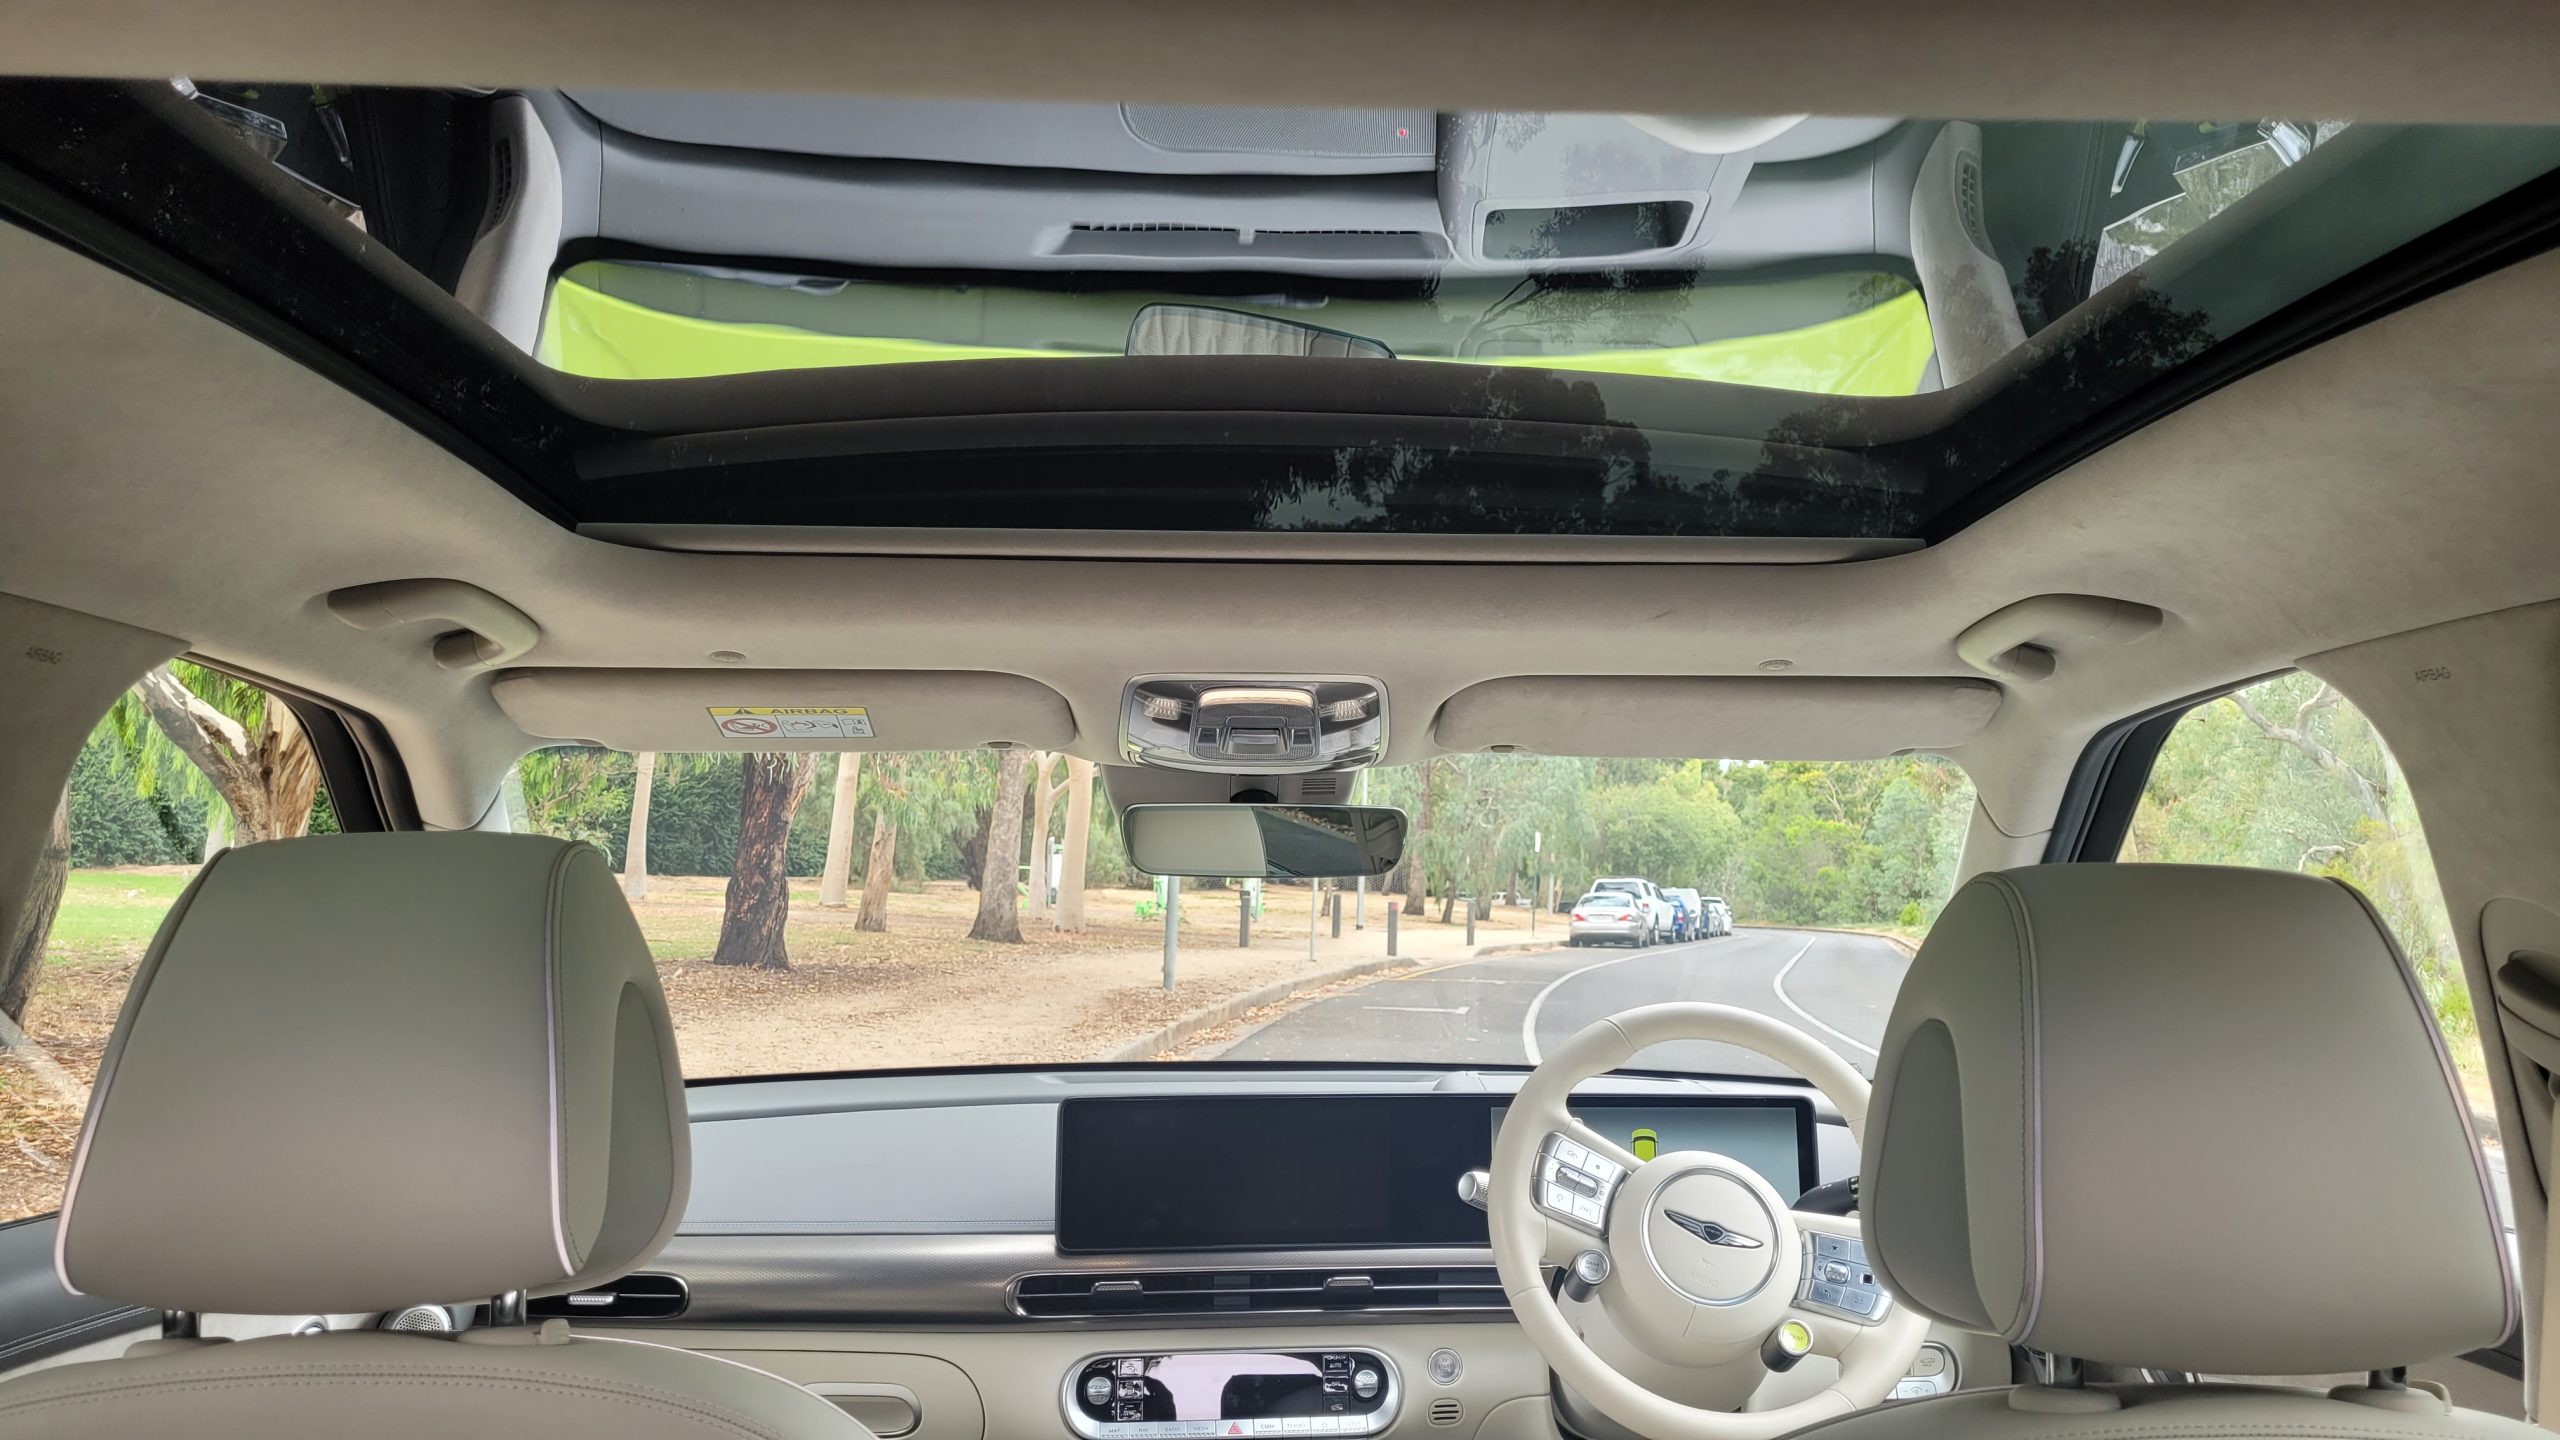 Interior view showing moon roof open and looking out the front windscreen of the GV60